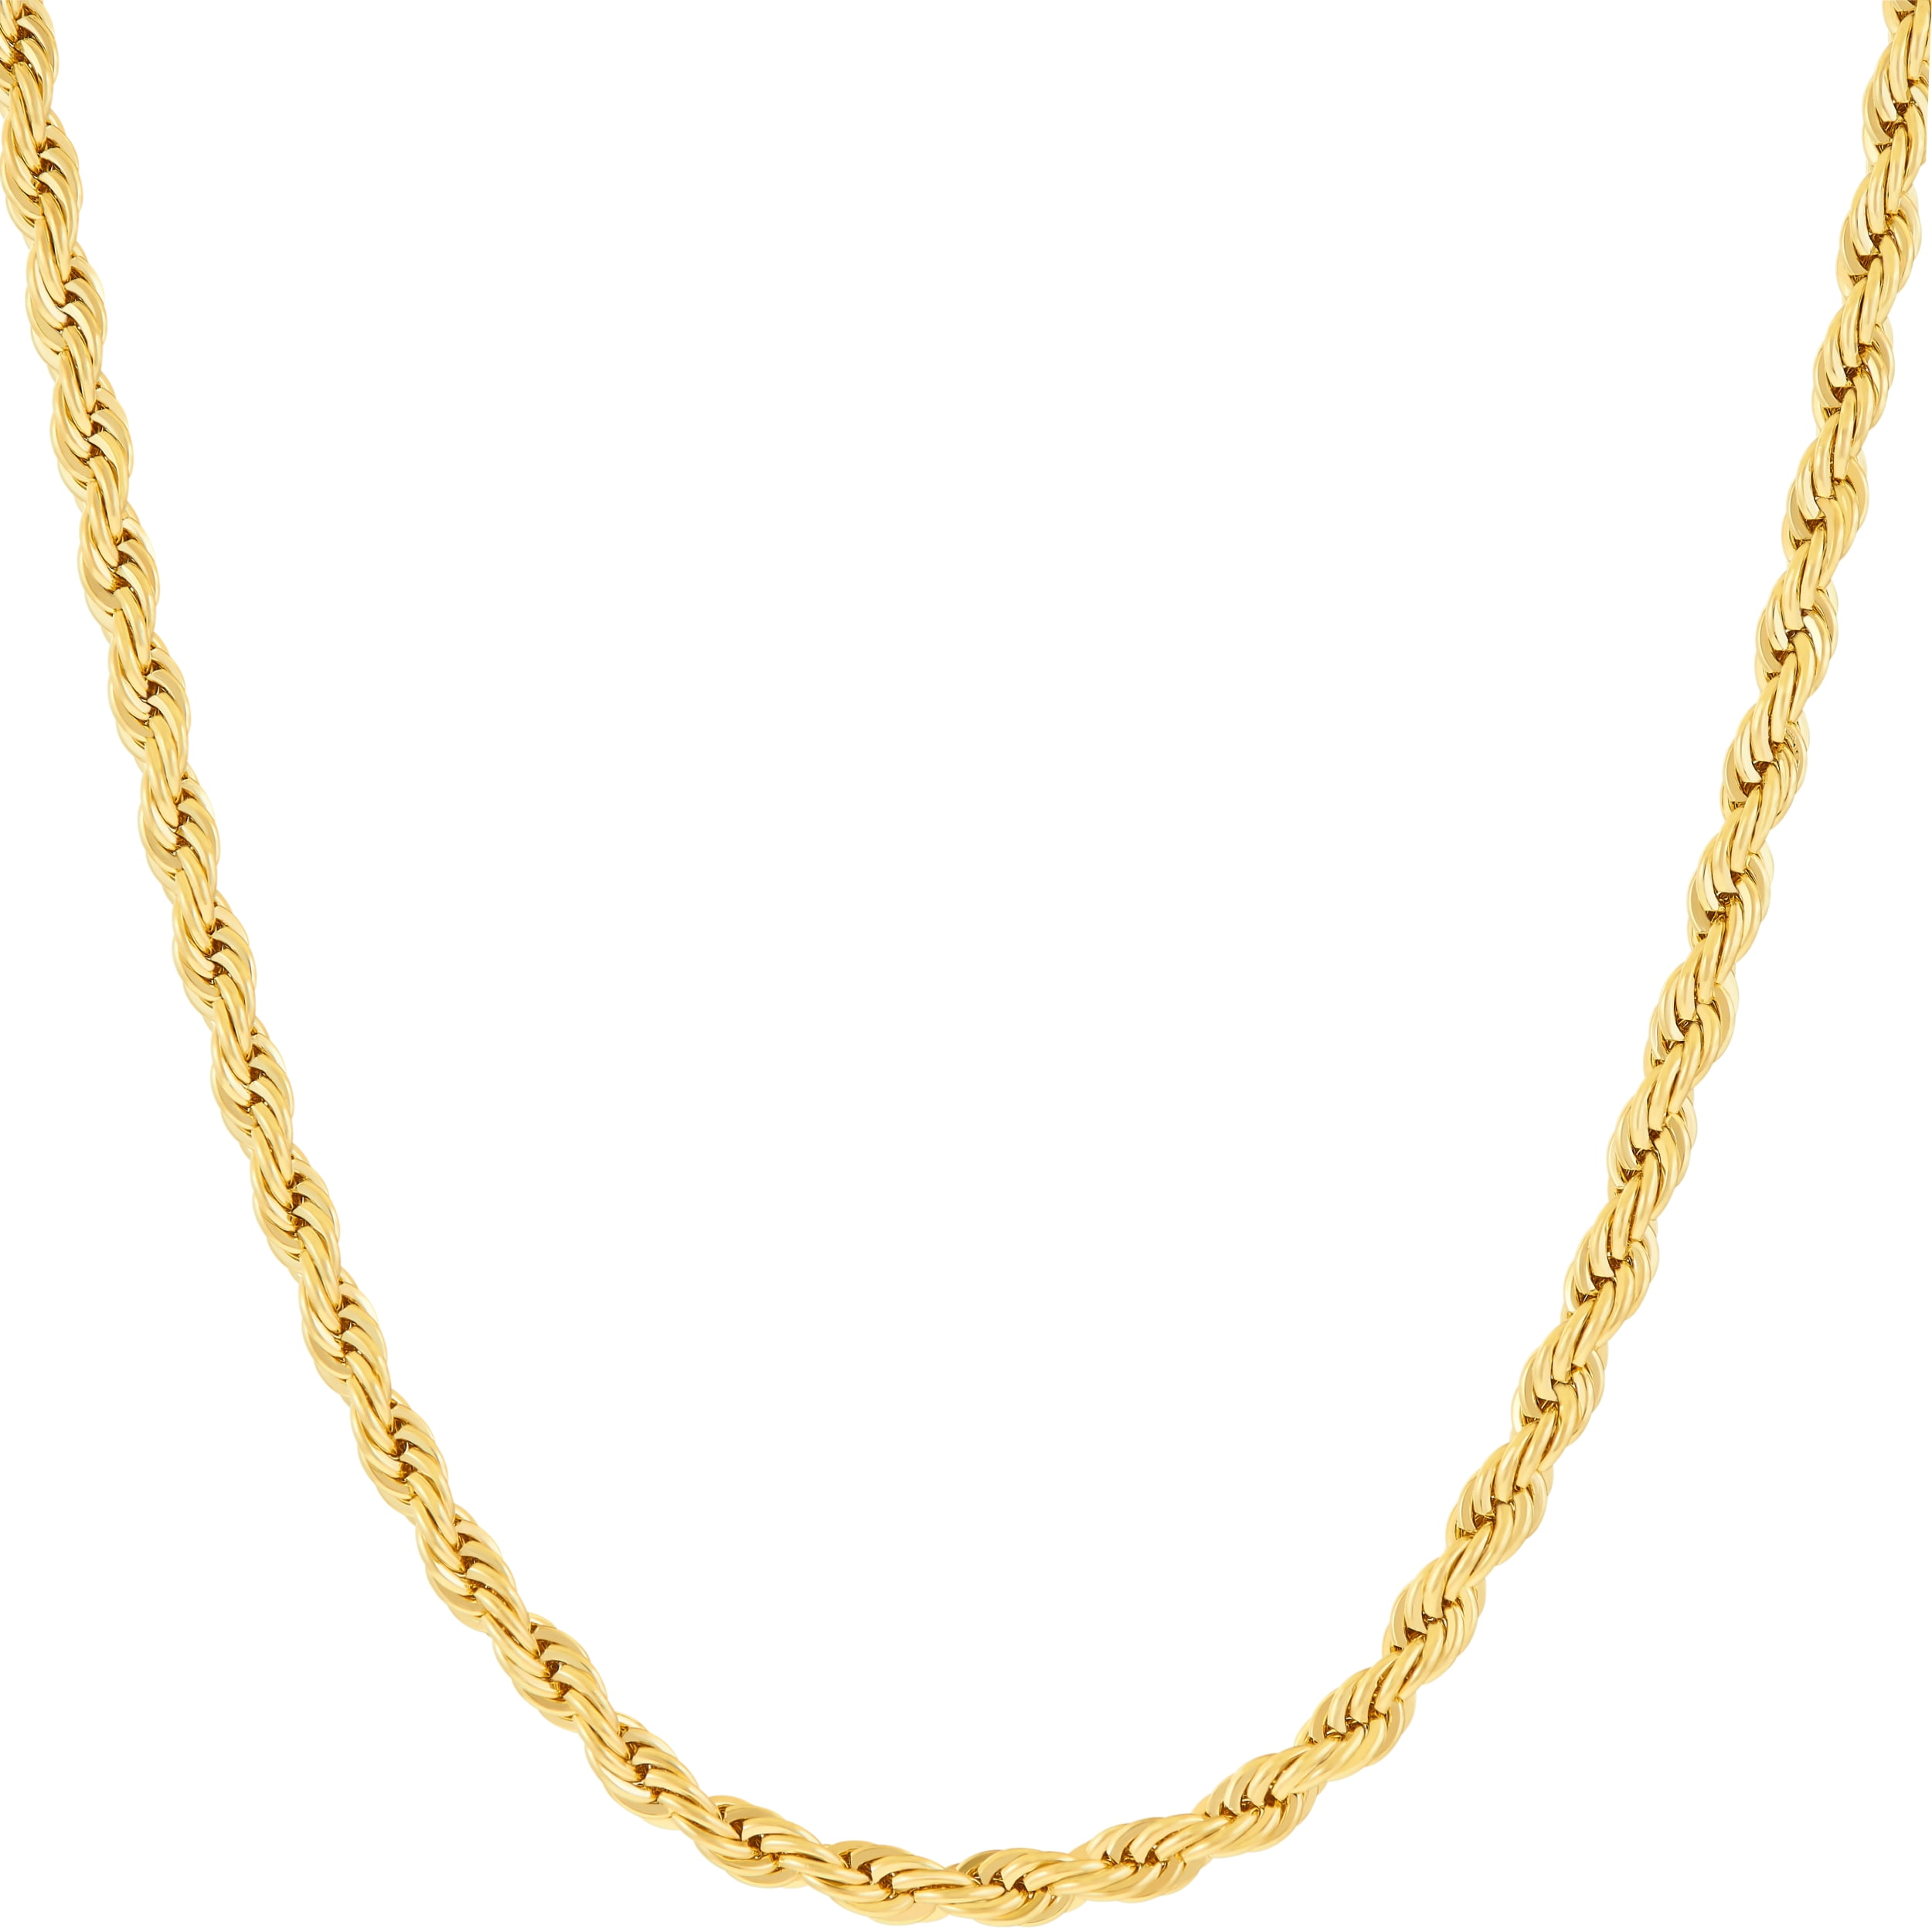 3mm Durable Statement Necklace Lifetime Jewelry Gold Rope Chain for Women & Men Up to 20X More 24k Real Gold Plating Than Other Pendant Necklaces Chains 16 to 30 inches